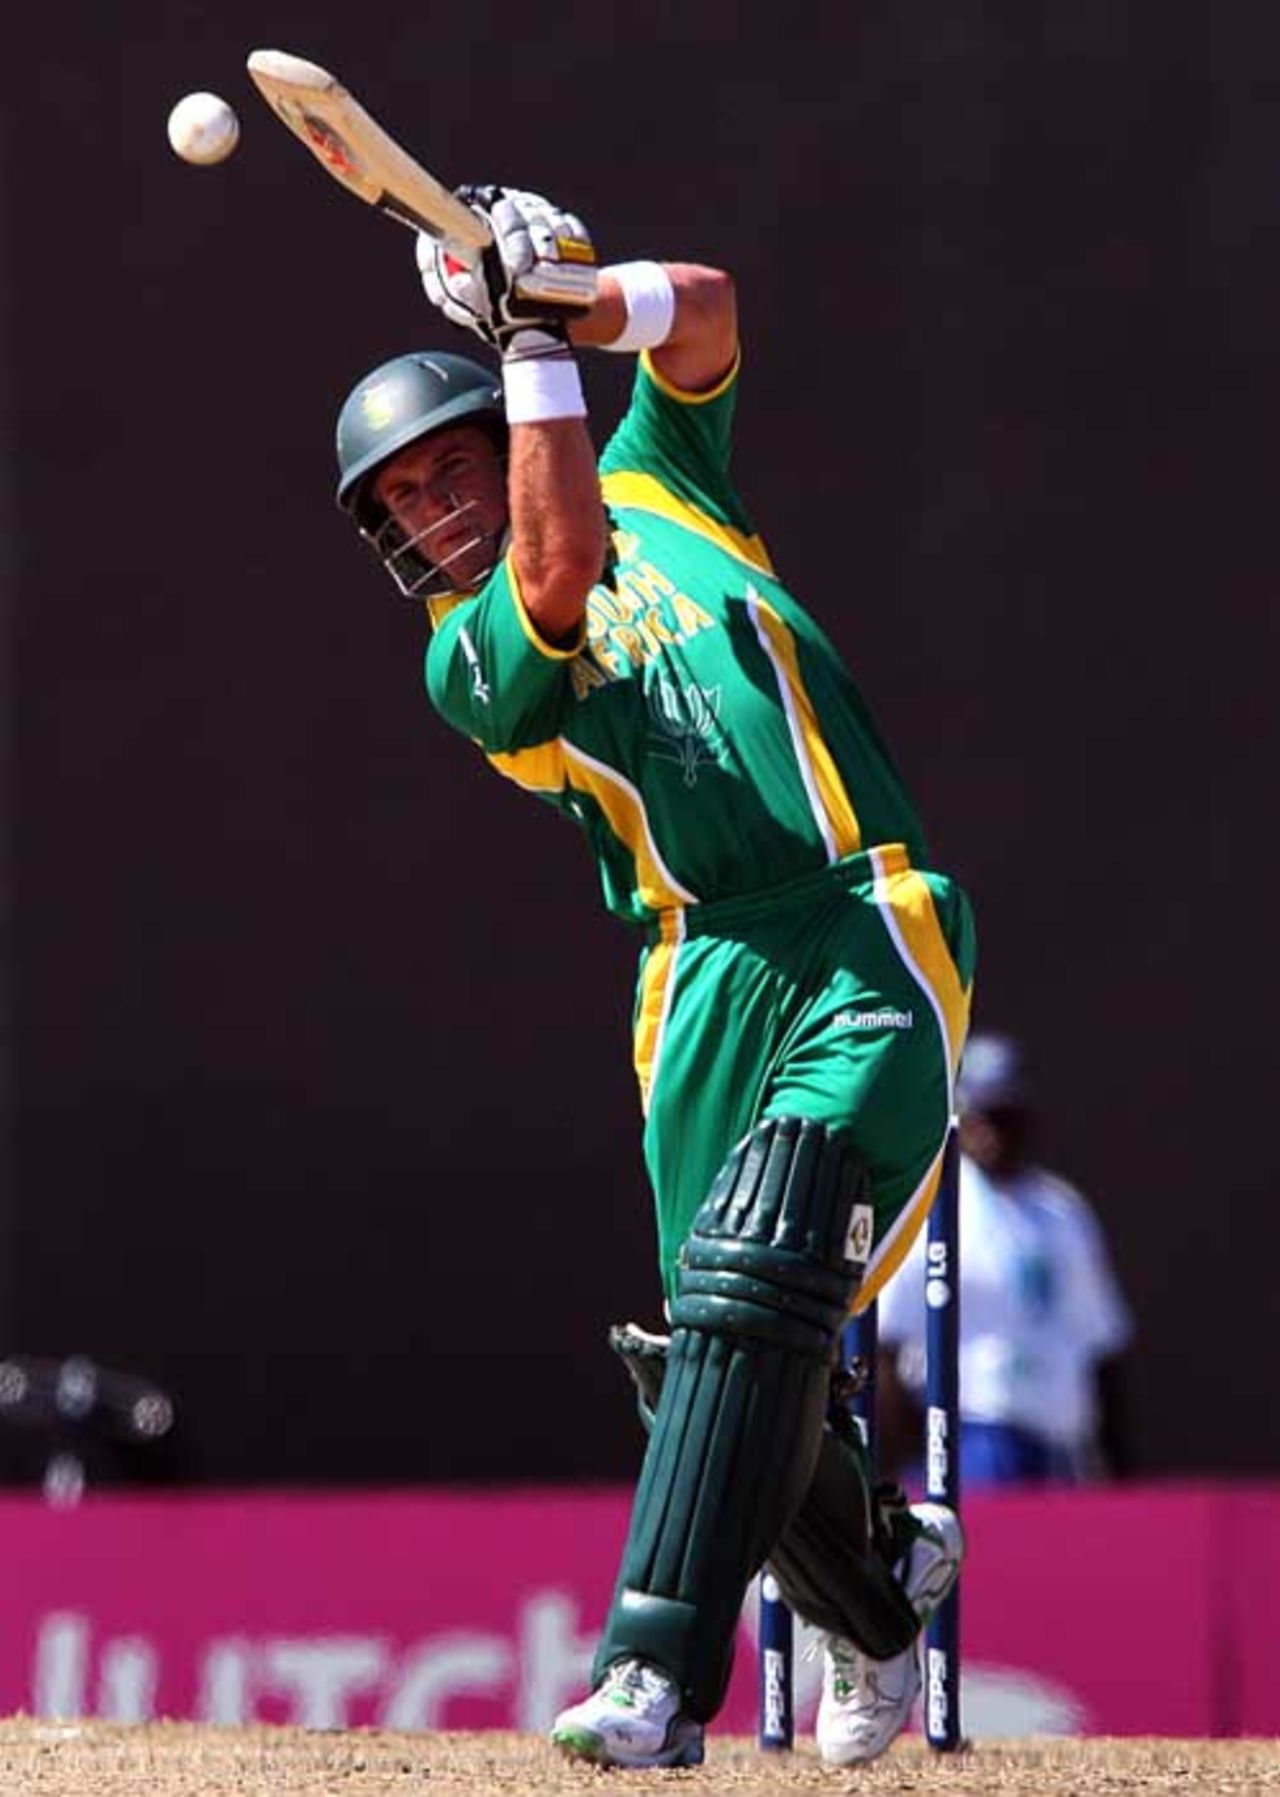 AB de Villiers took the Australian attack to the tune of 92 runs from 70 balls, Group A, St Kitts, March 24, 2007